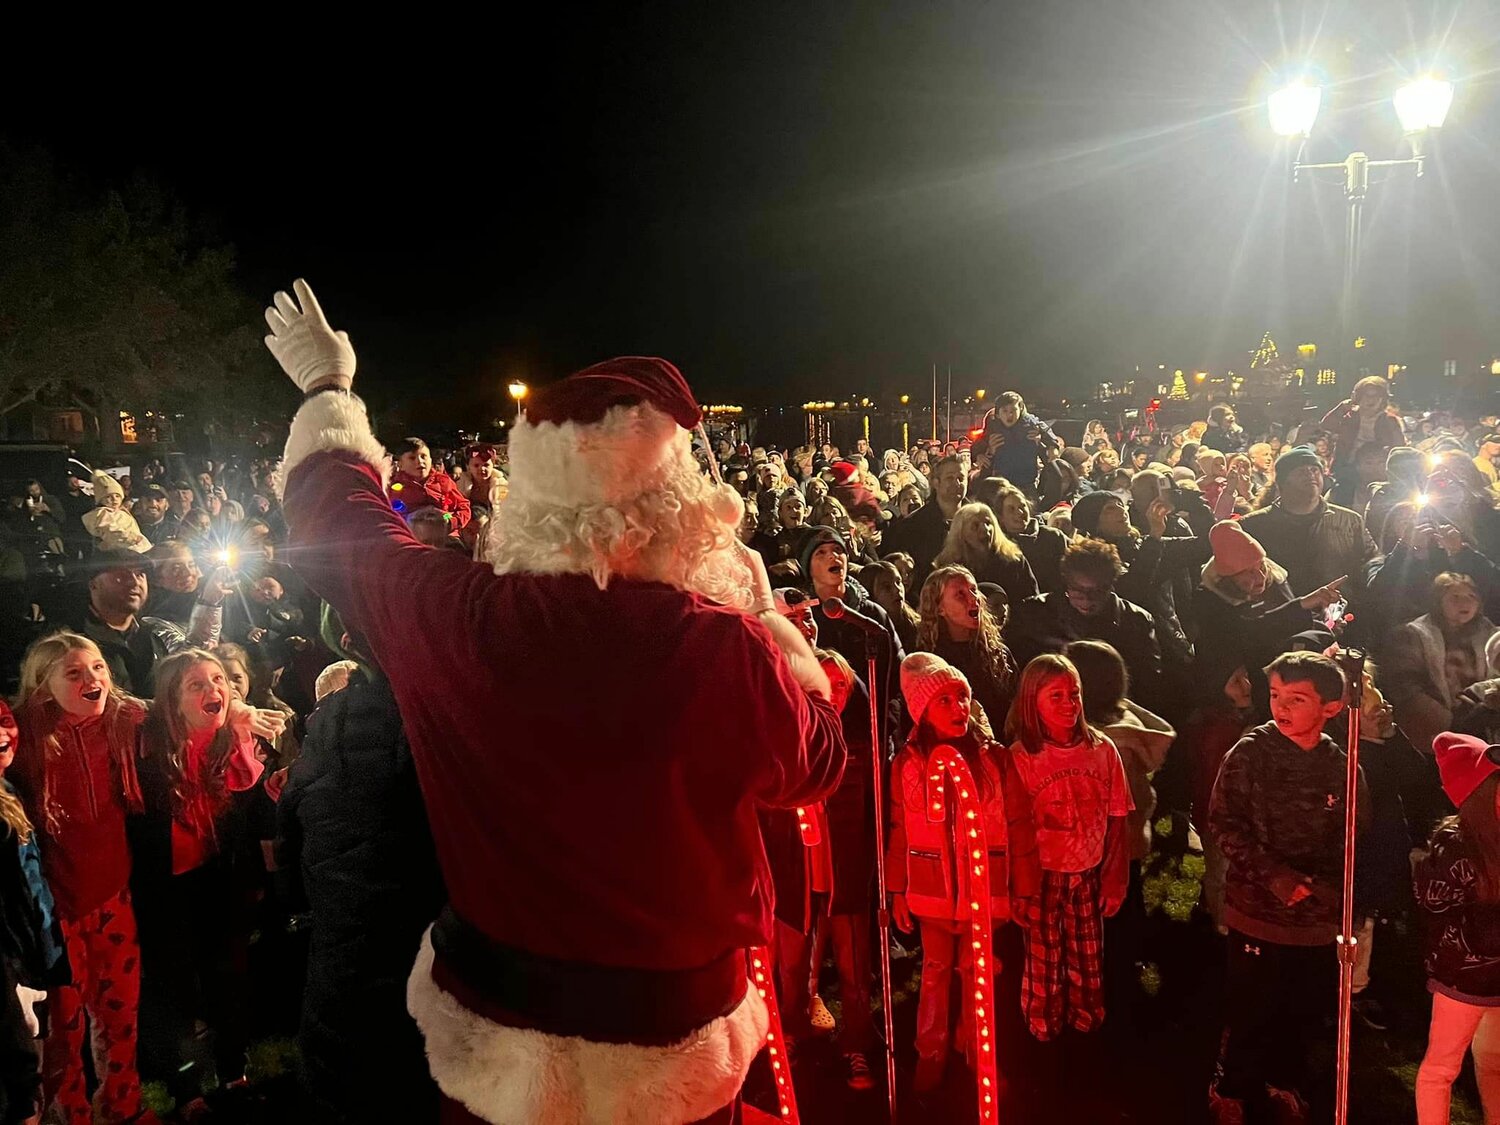 Santa will make a special appearance at the top of the canal Christmas tree lighting this year.